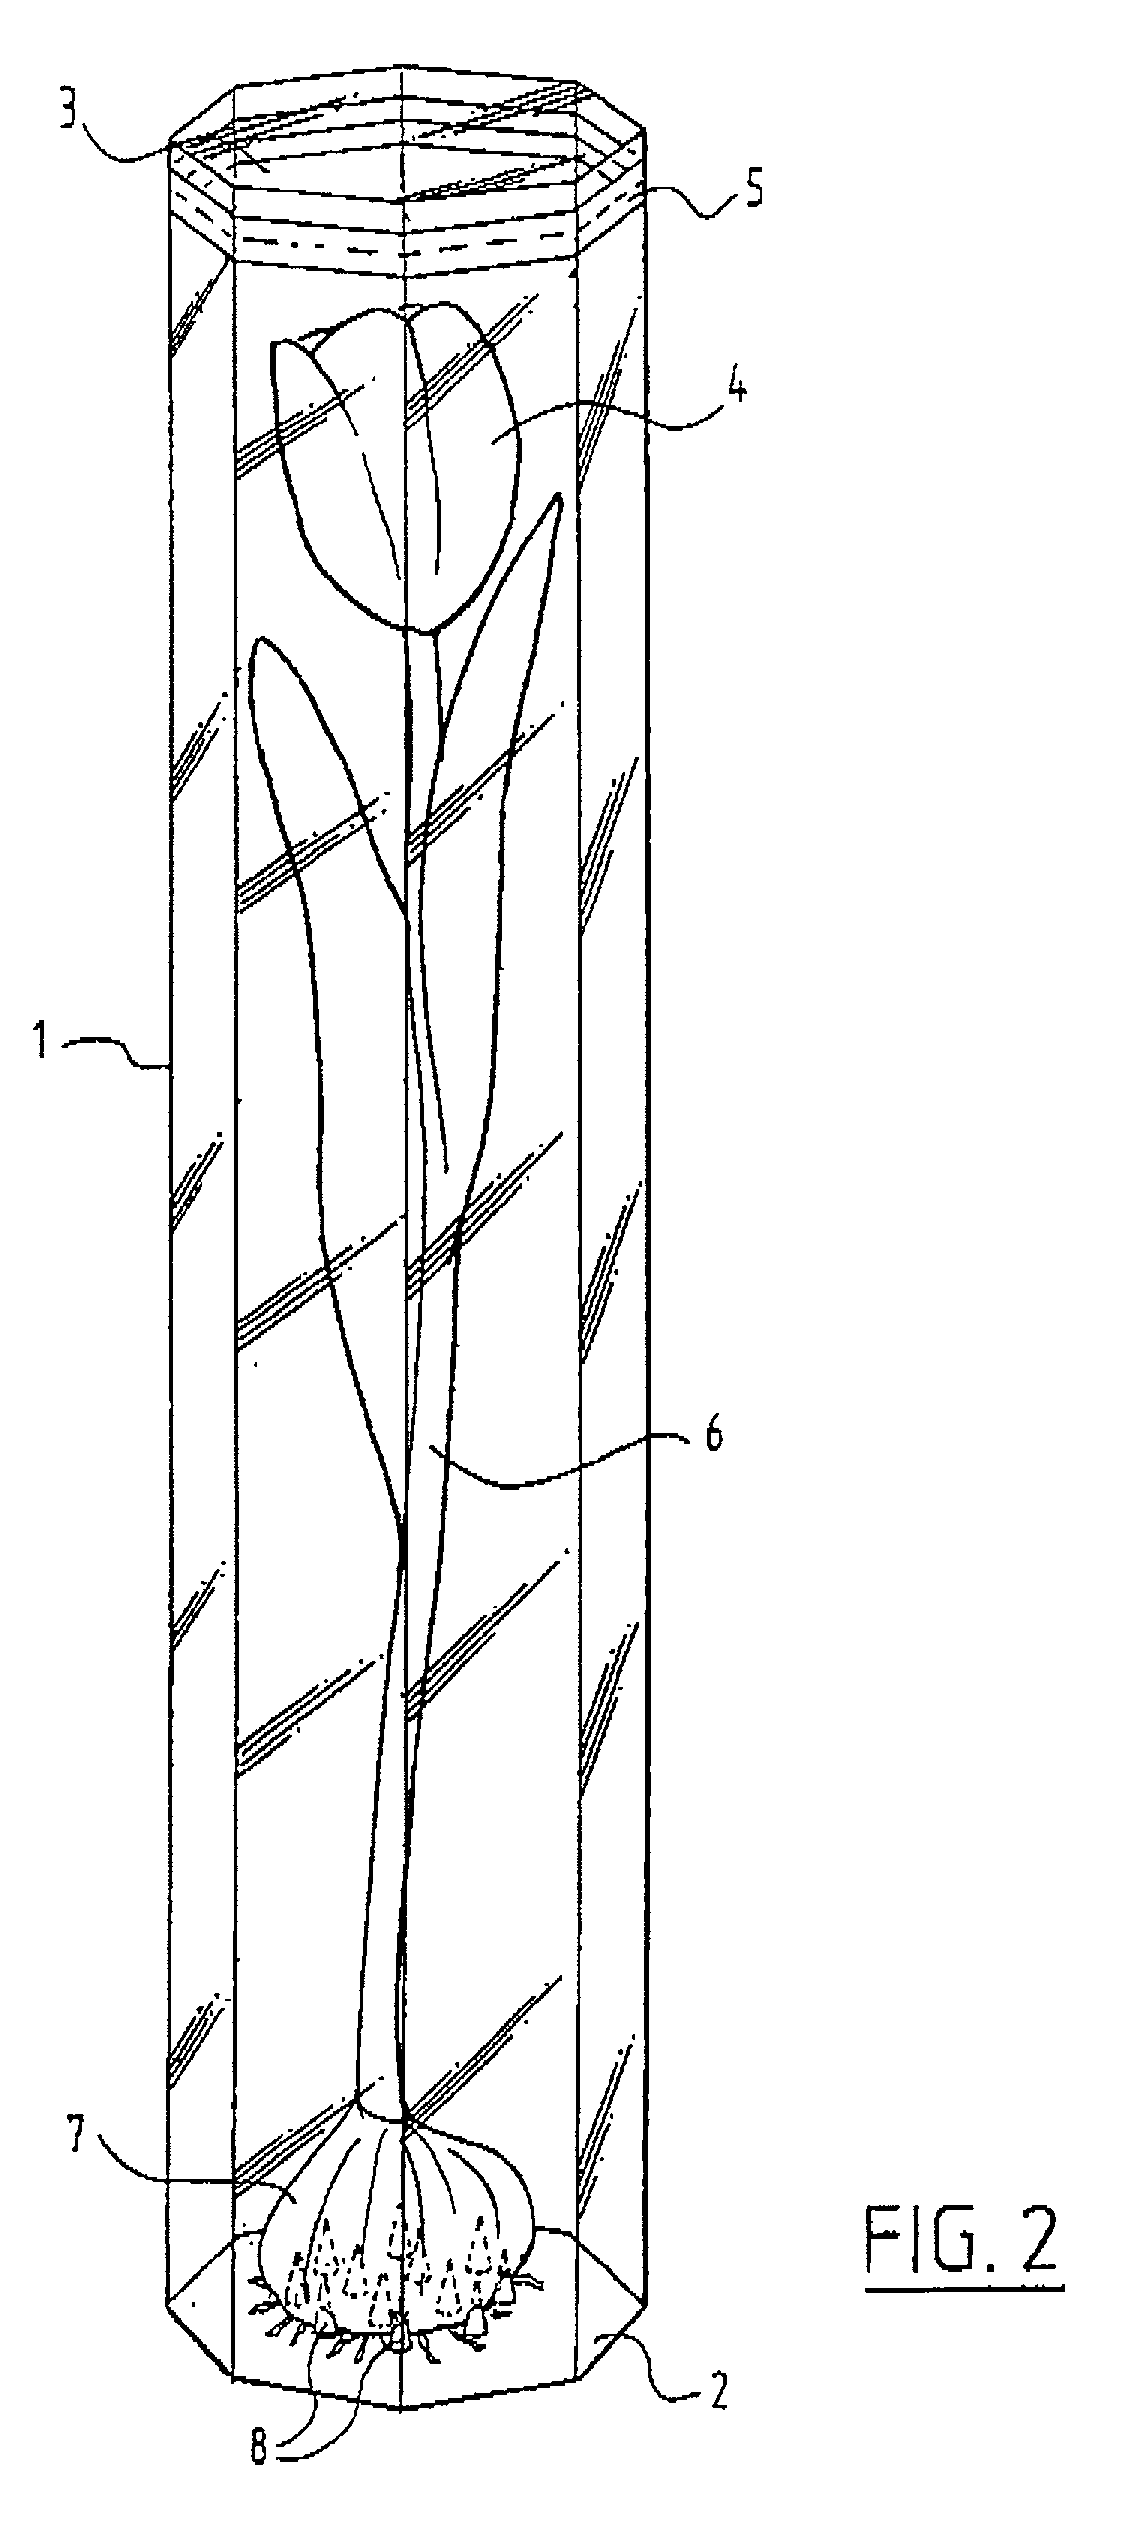 Display package at least substantially made of a transparent plastic material